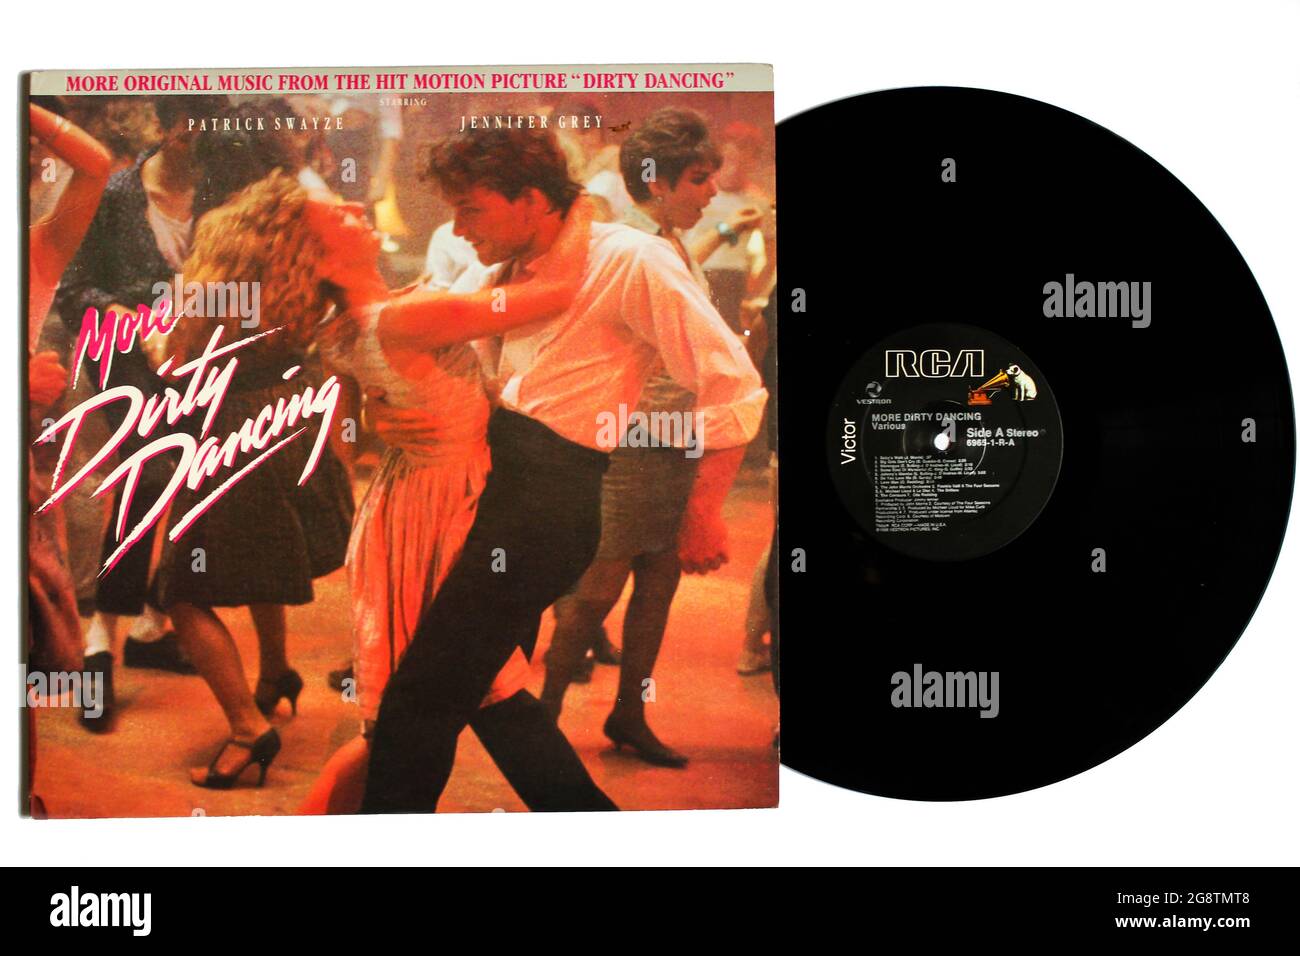 rådgive gardin Afstemning More Dirty Dancing: Original Soundtrack from the Vestron Motion Picture.  Music album on vinyl record LP disc. Album cover Stock Photo - Alamy